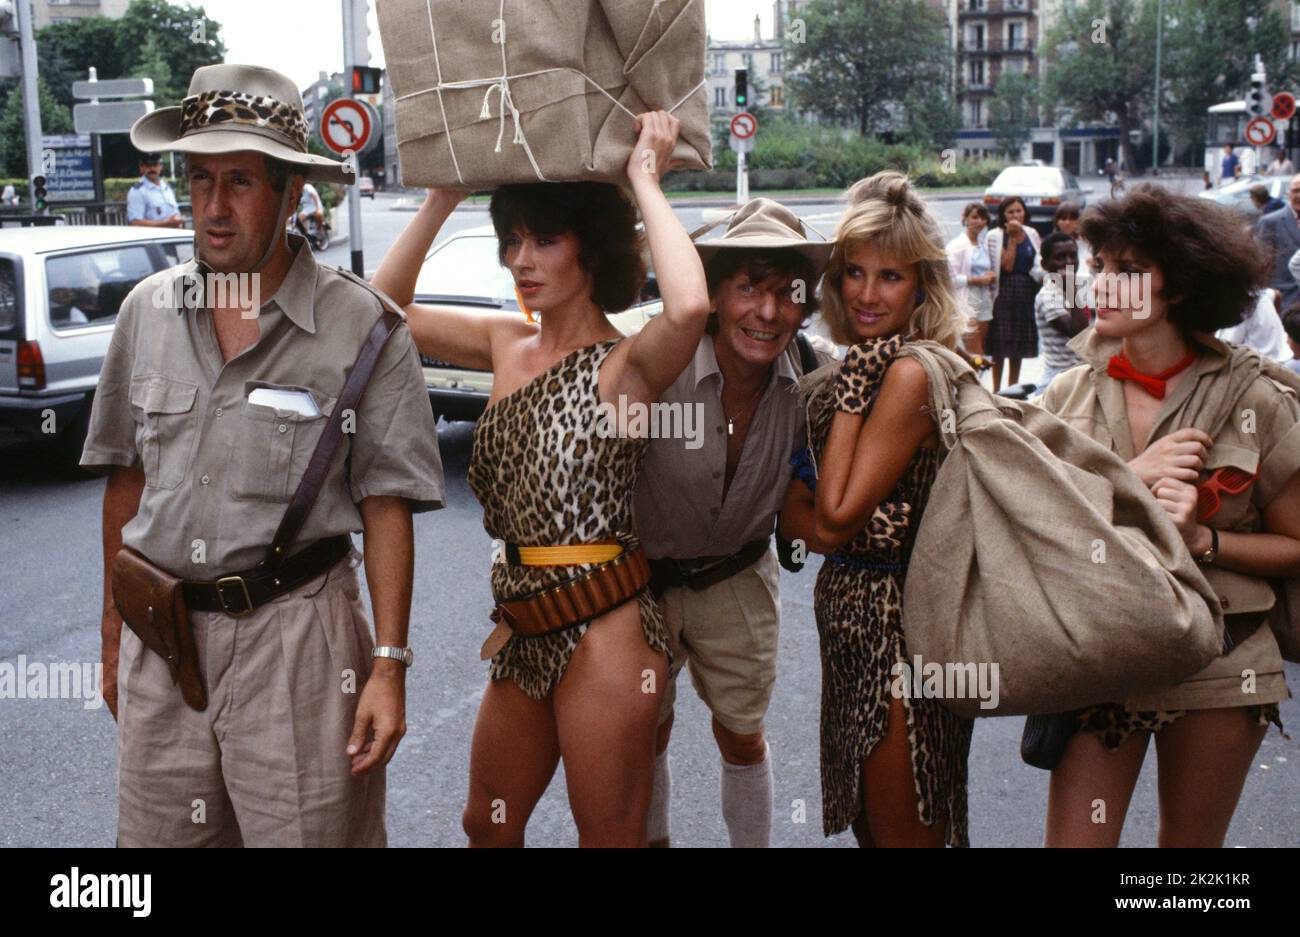 Stéphane Collaro, ?, Alain Scoff, Natasha Guinaudeau and Terry Shane in a sketch for the comedy TV show 'Cocoricocoboy' in 1986. Stock Photo